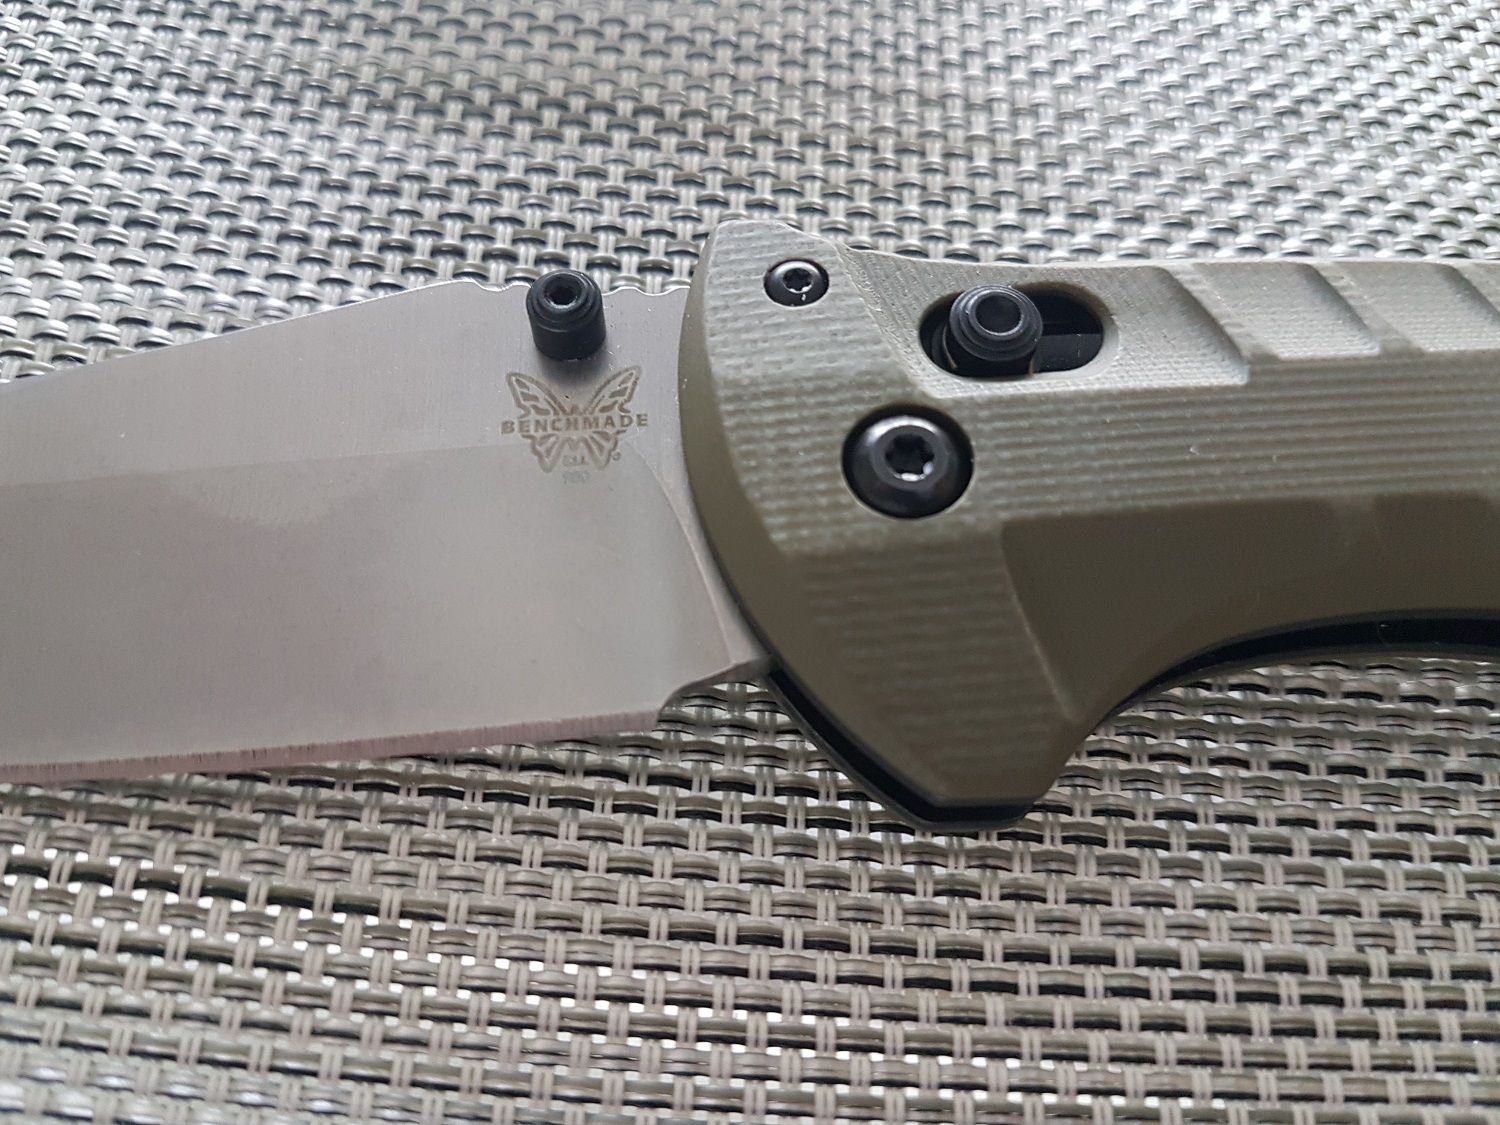 The Benchmade 980 TURRET tactical folding knife is a very large 100% ambidextrous Axis lock folder with a 9.40cm (3.7in) drop point blade of CPM-S30V steel, 3.150mm (0.124in) thick.